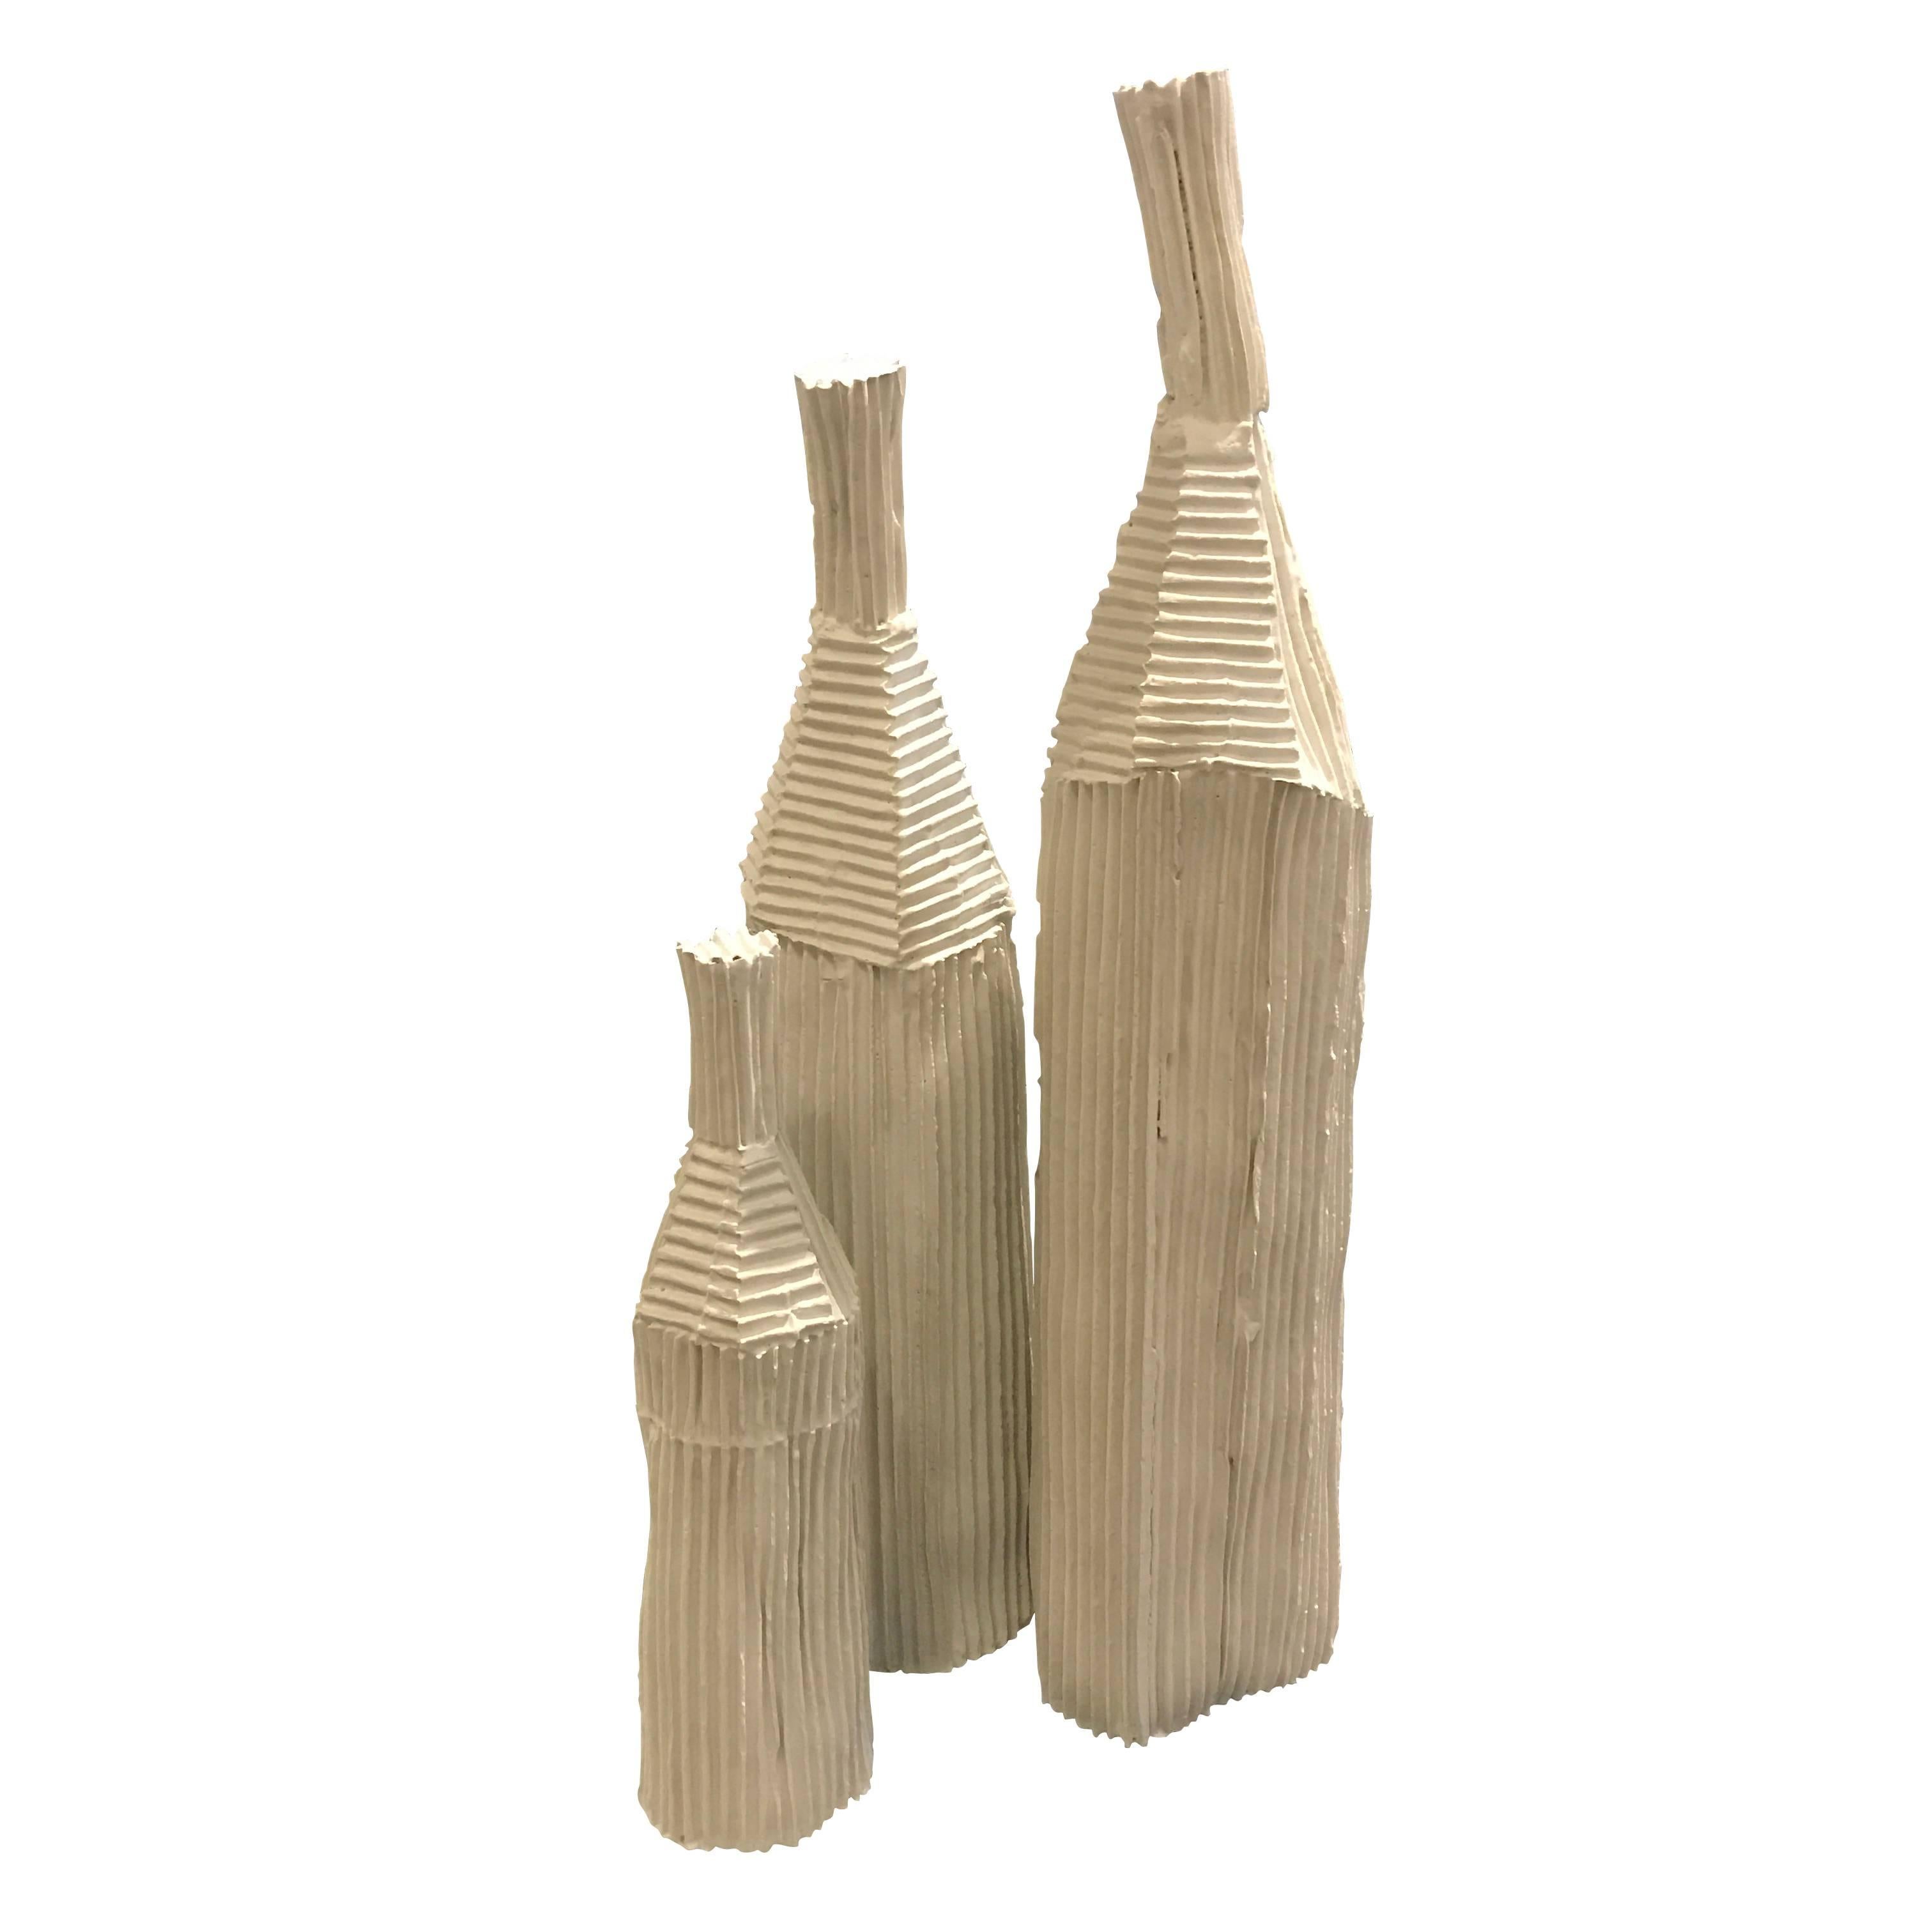 Contemporary Italian handmade medium sized ceramic vase with corrugated design.
Works well with large size (S4736) and small (S4738)
See image #2.